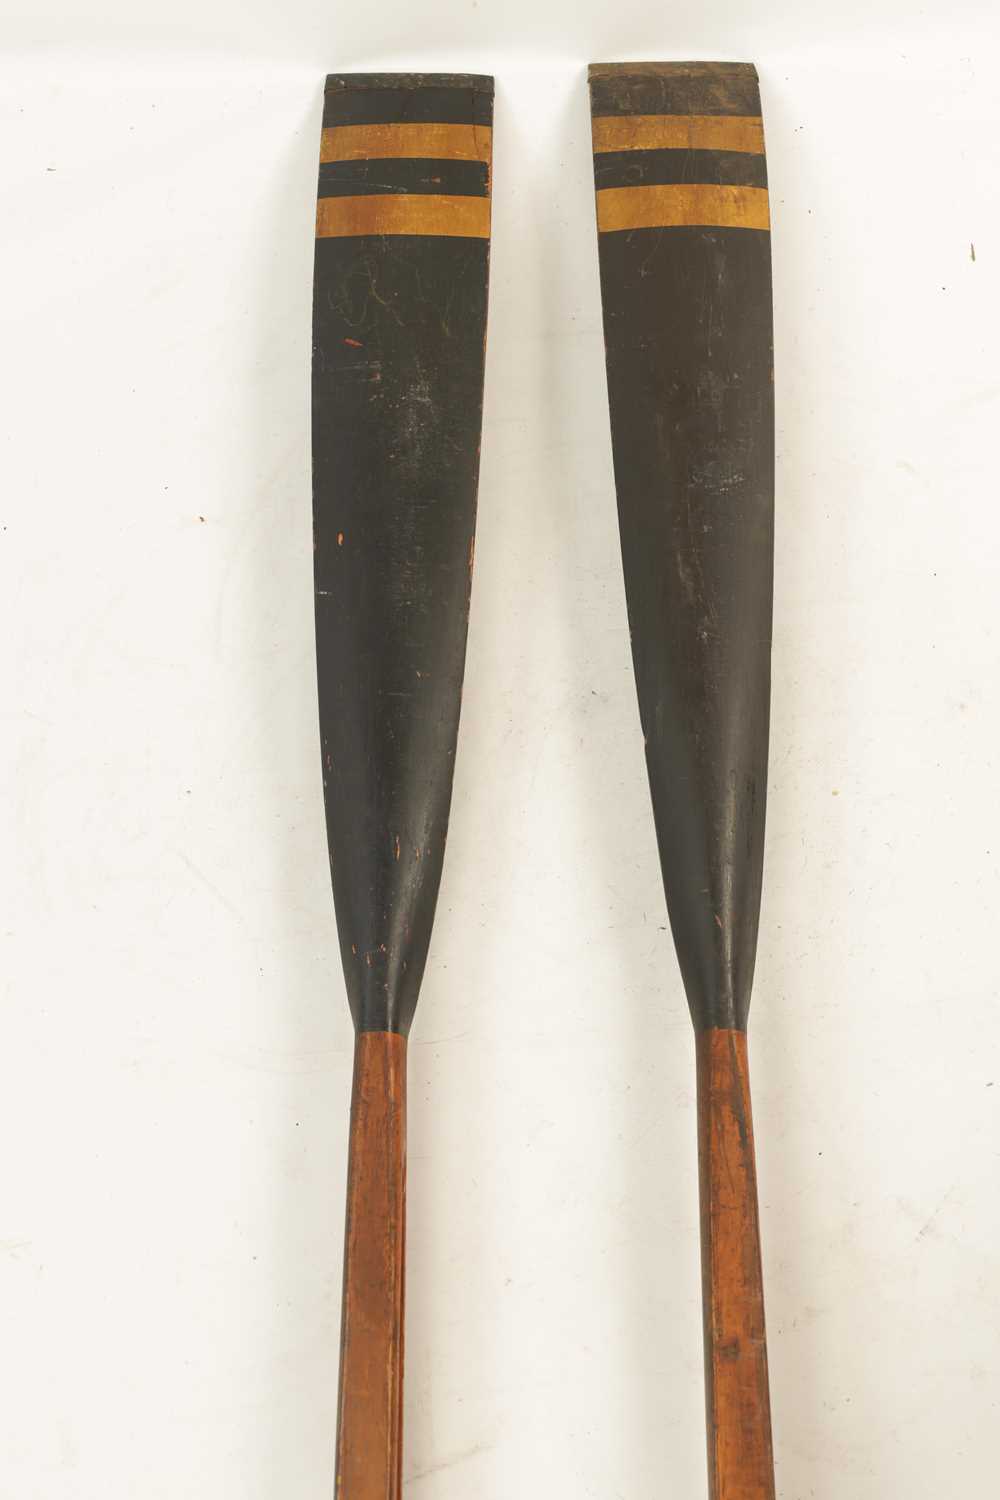 A GOOD PAIR OF PRESENTATIONS OXFORD UNIVERSITY ROWING OARS DATED 1900. - Image 14 of 14